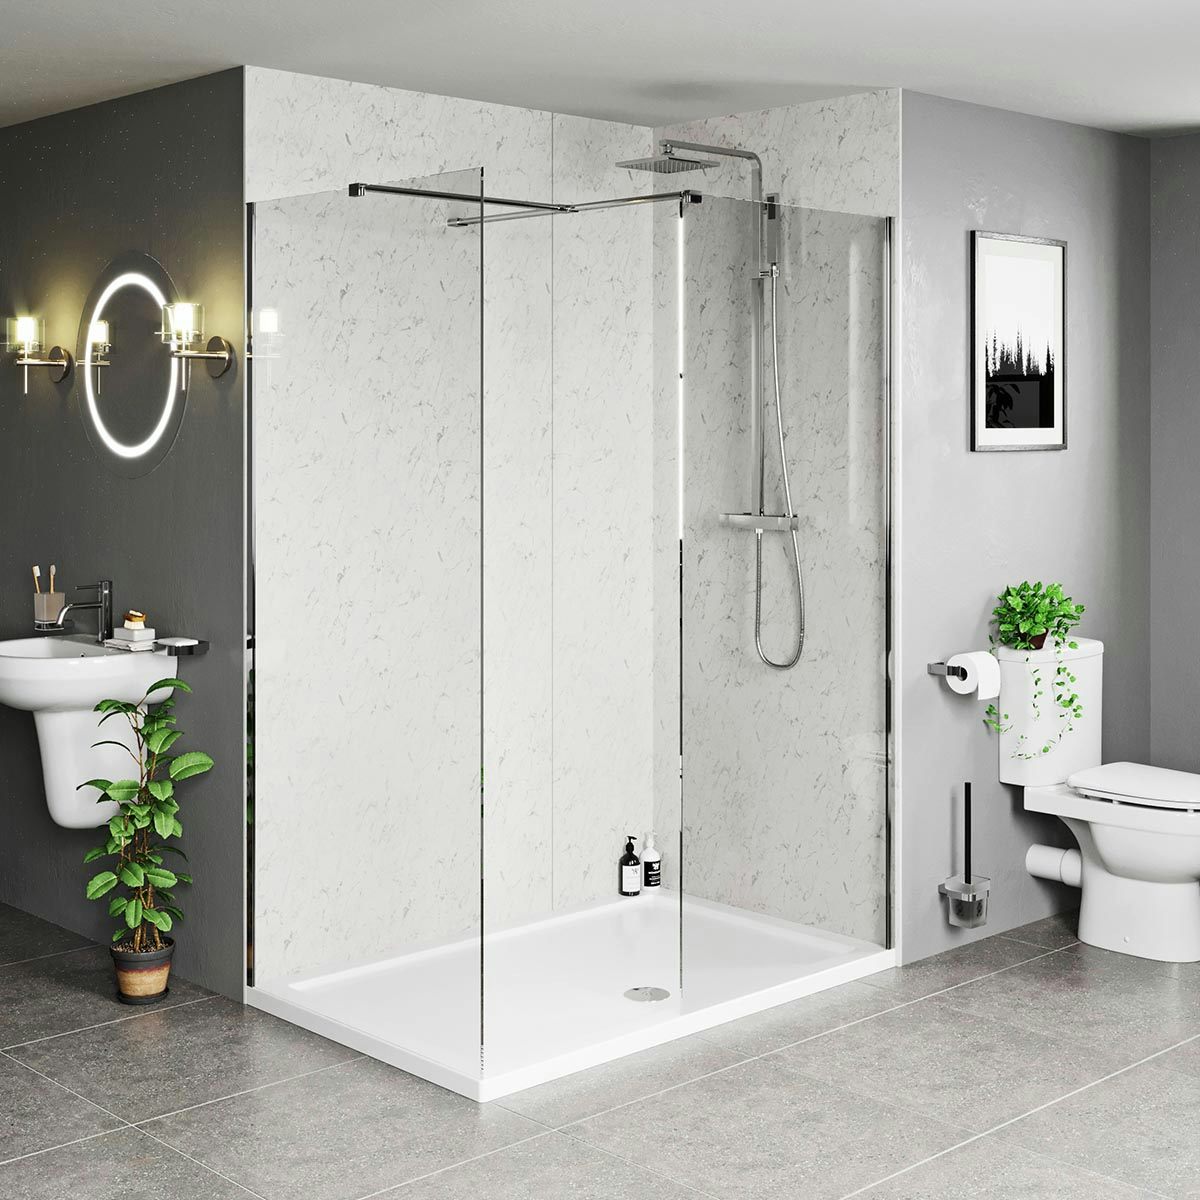 Mode Burton 8mm walk in shower enclosure pack with stone tray 1200 x 800